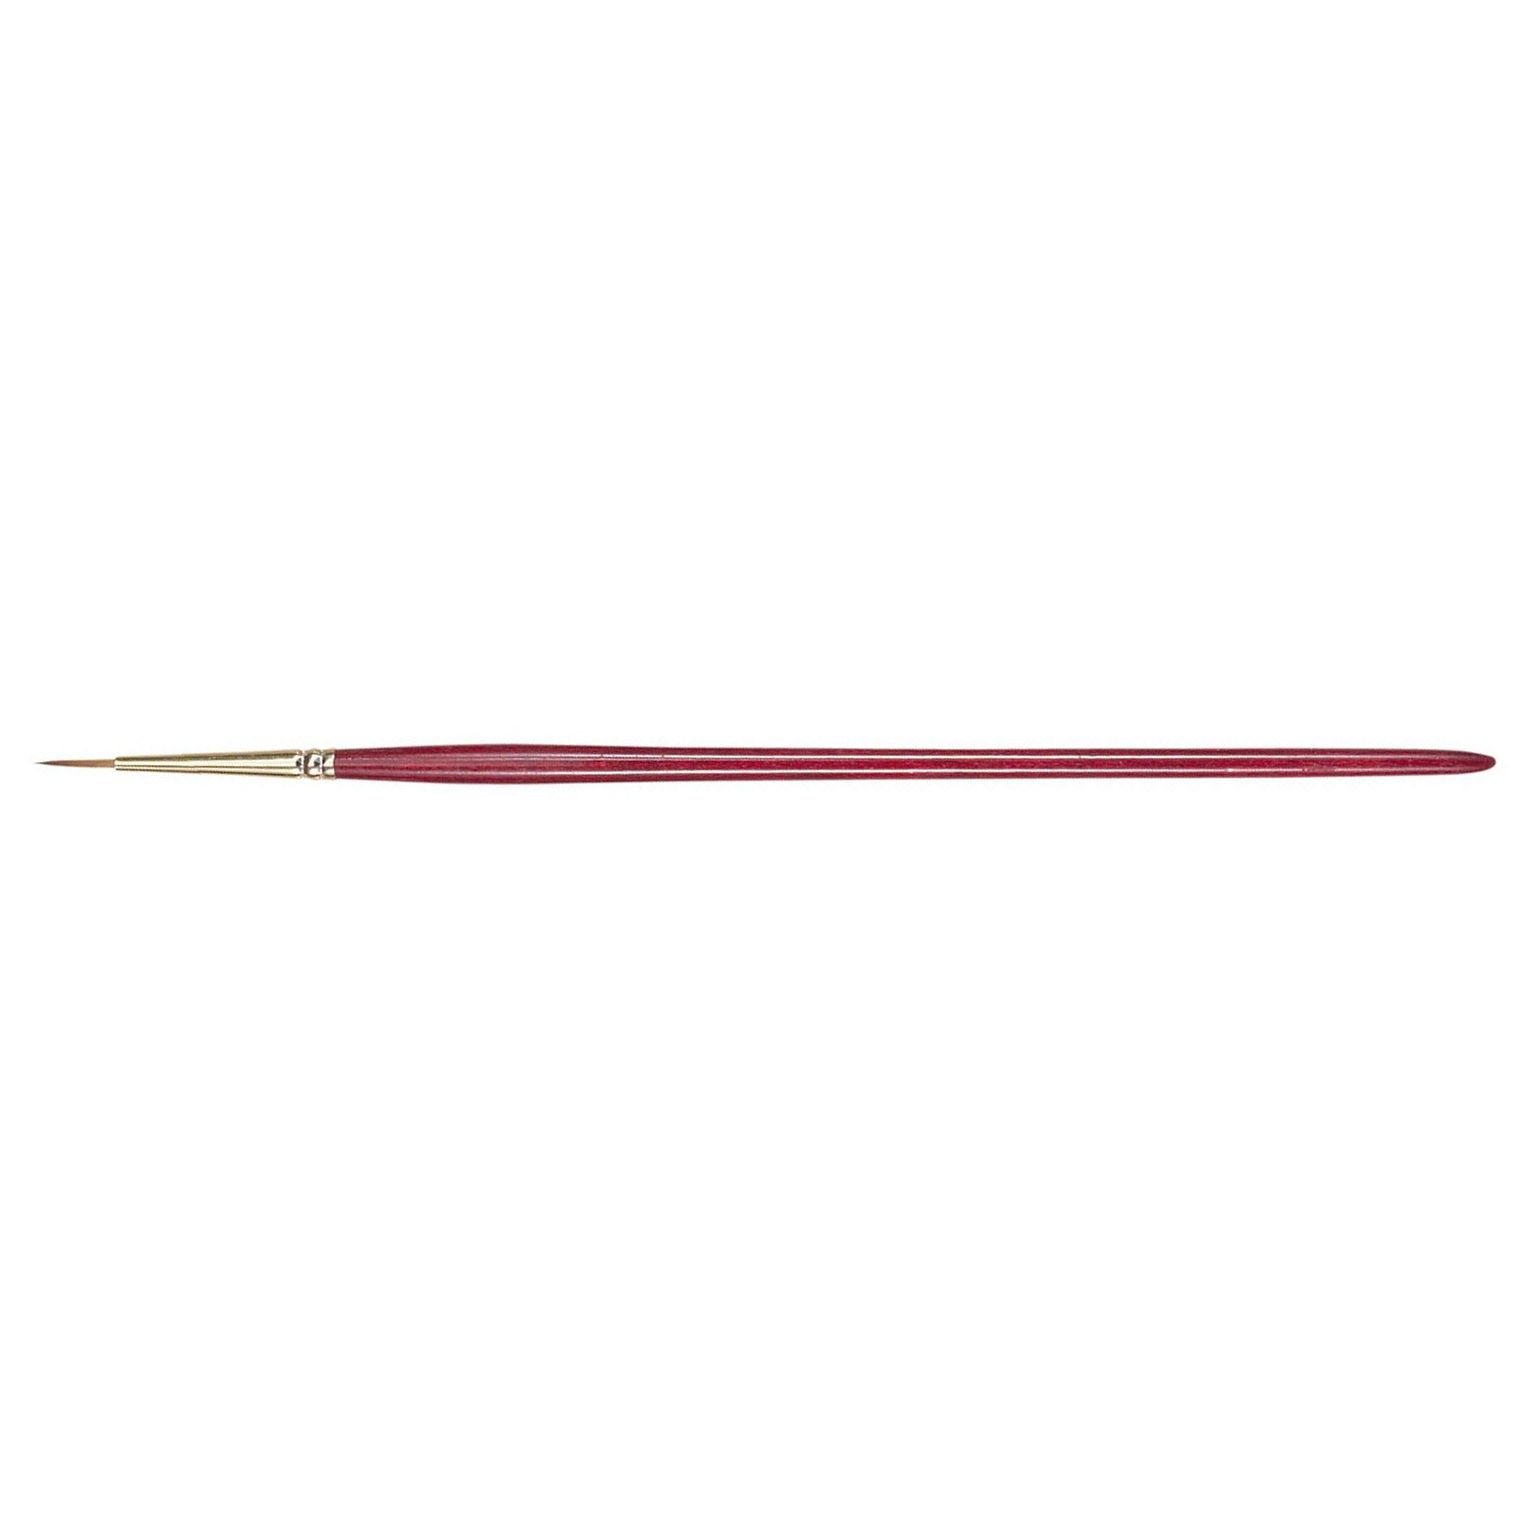 Princeton Series 4050 Heritage Synthetic Sable Brush - Short Liner - Short Handle - Size: 10/0